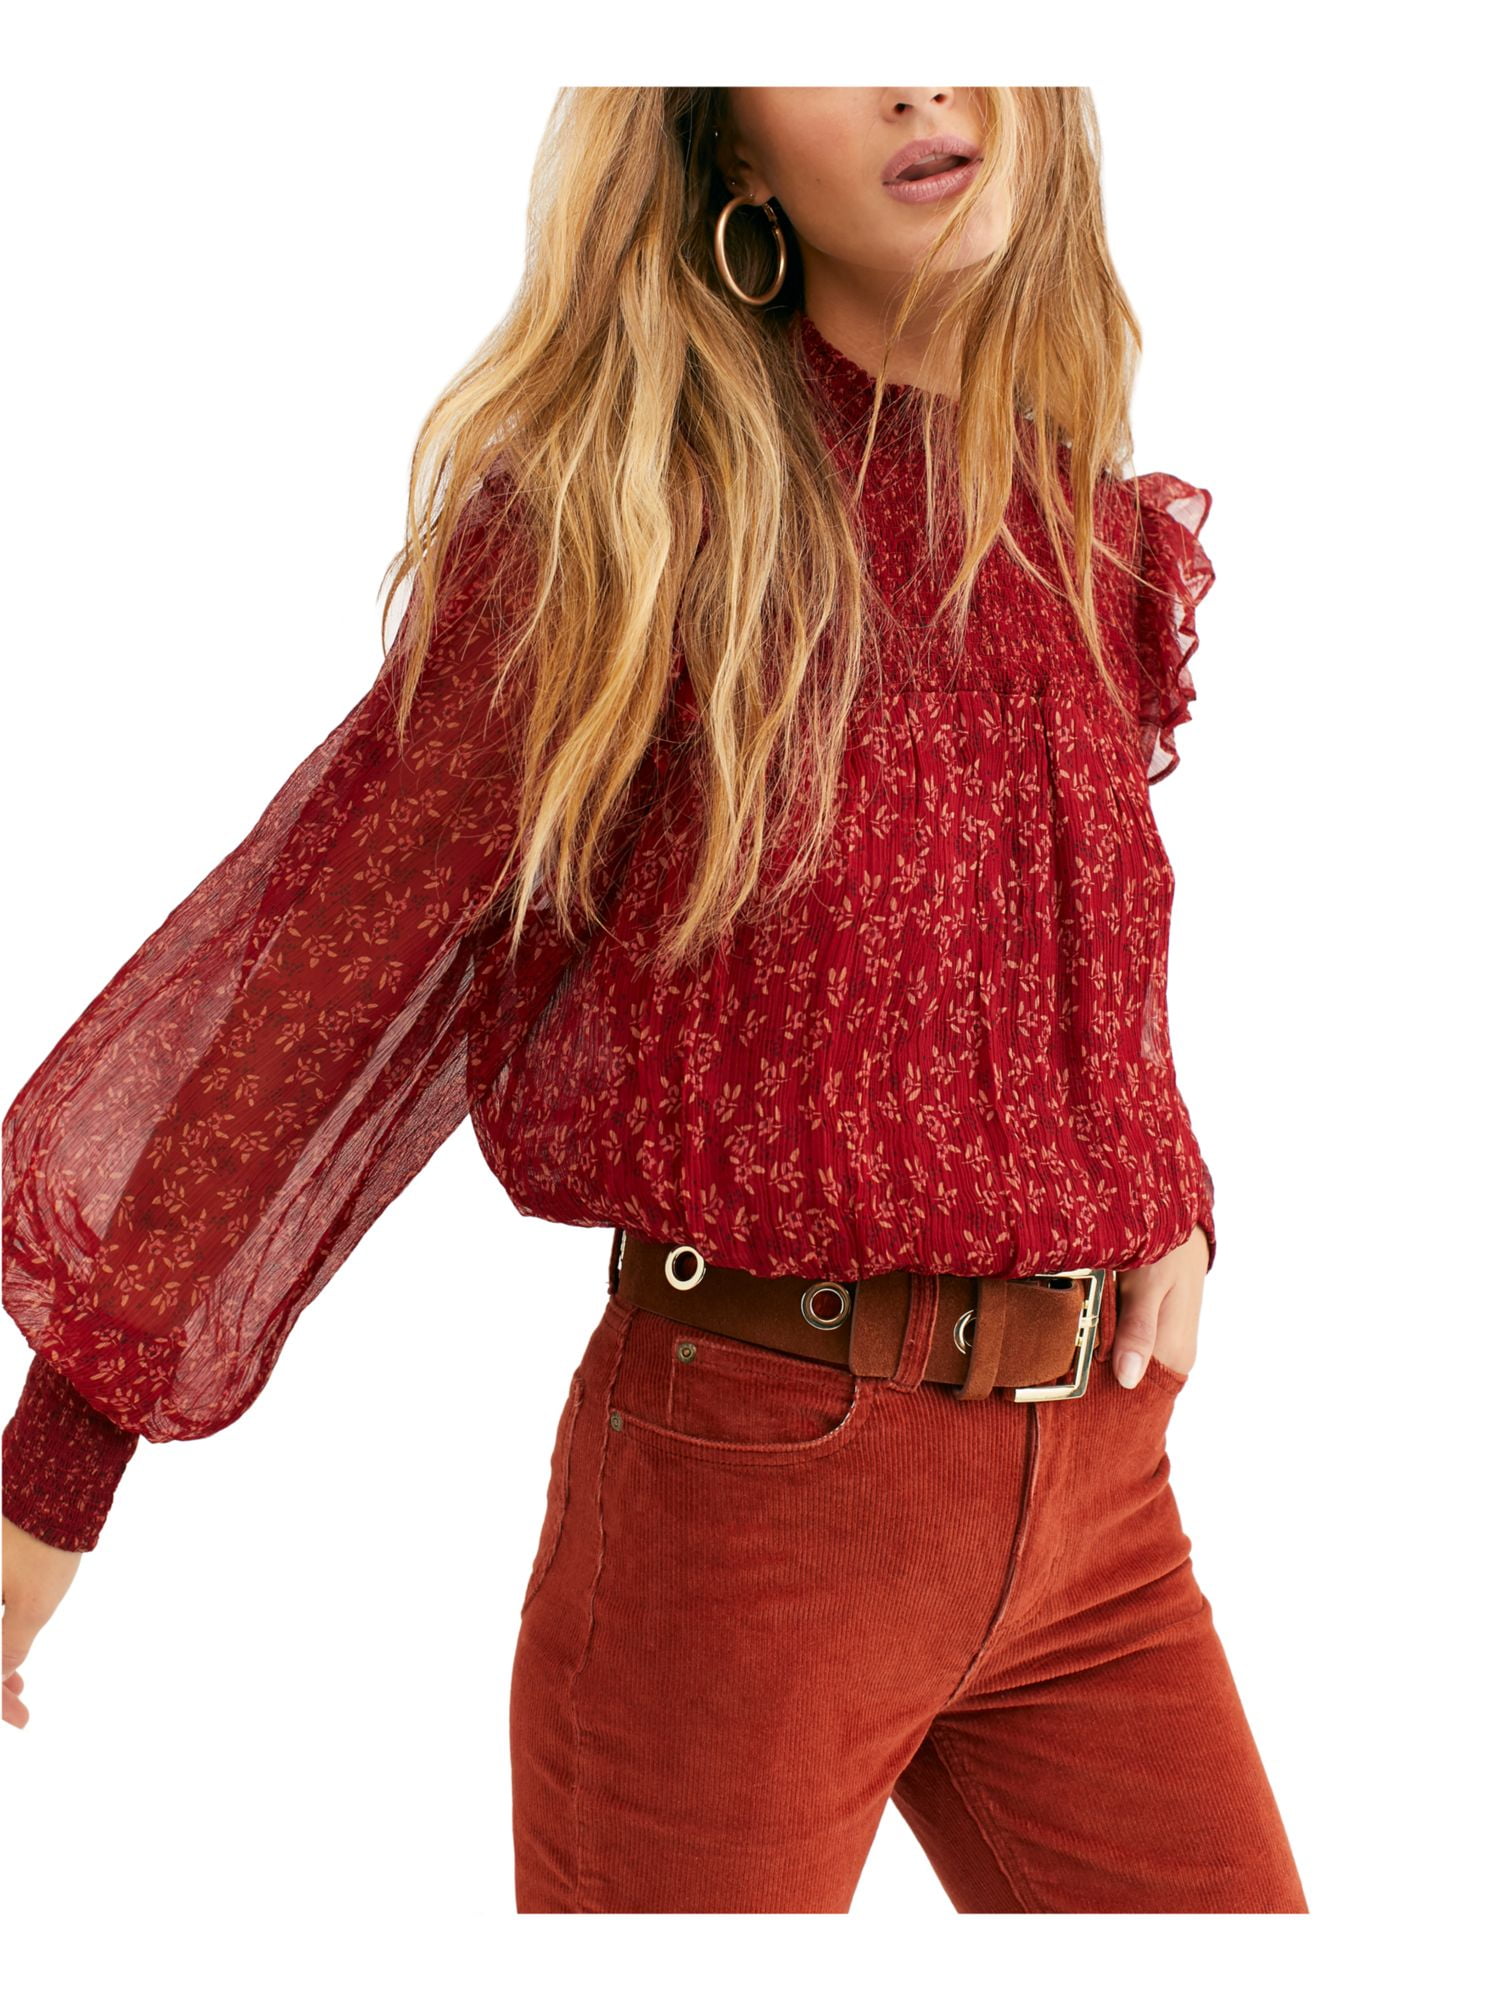 FREE PEOPLE Womens Red Sheer Printed Long Sleeve Mock Neck Top Size: S